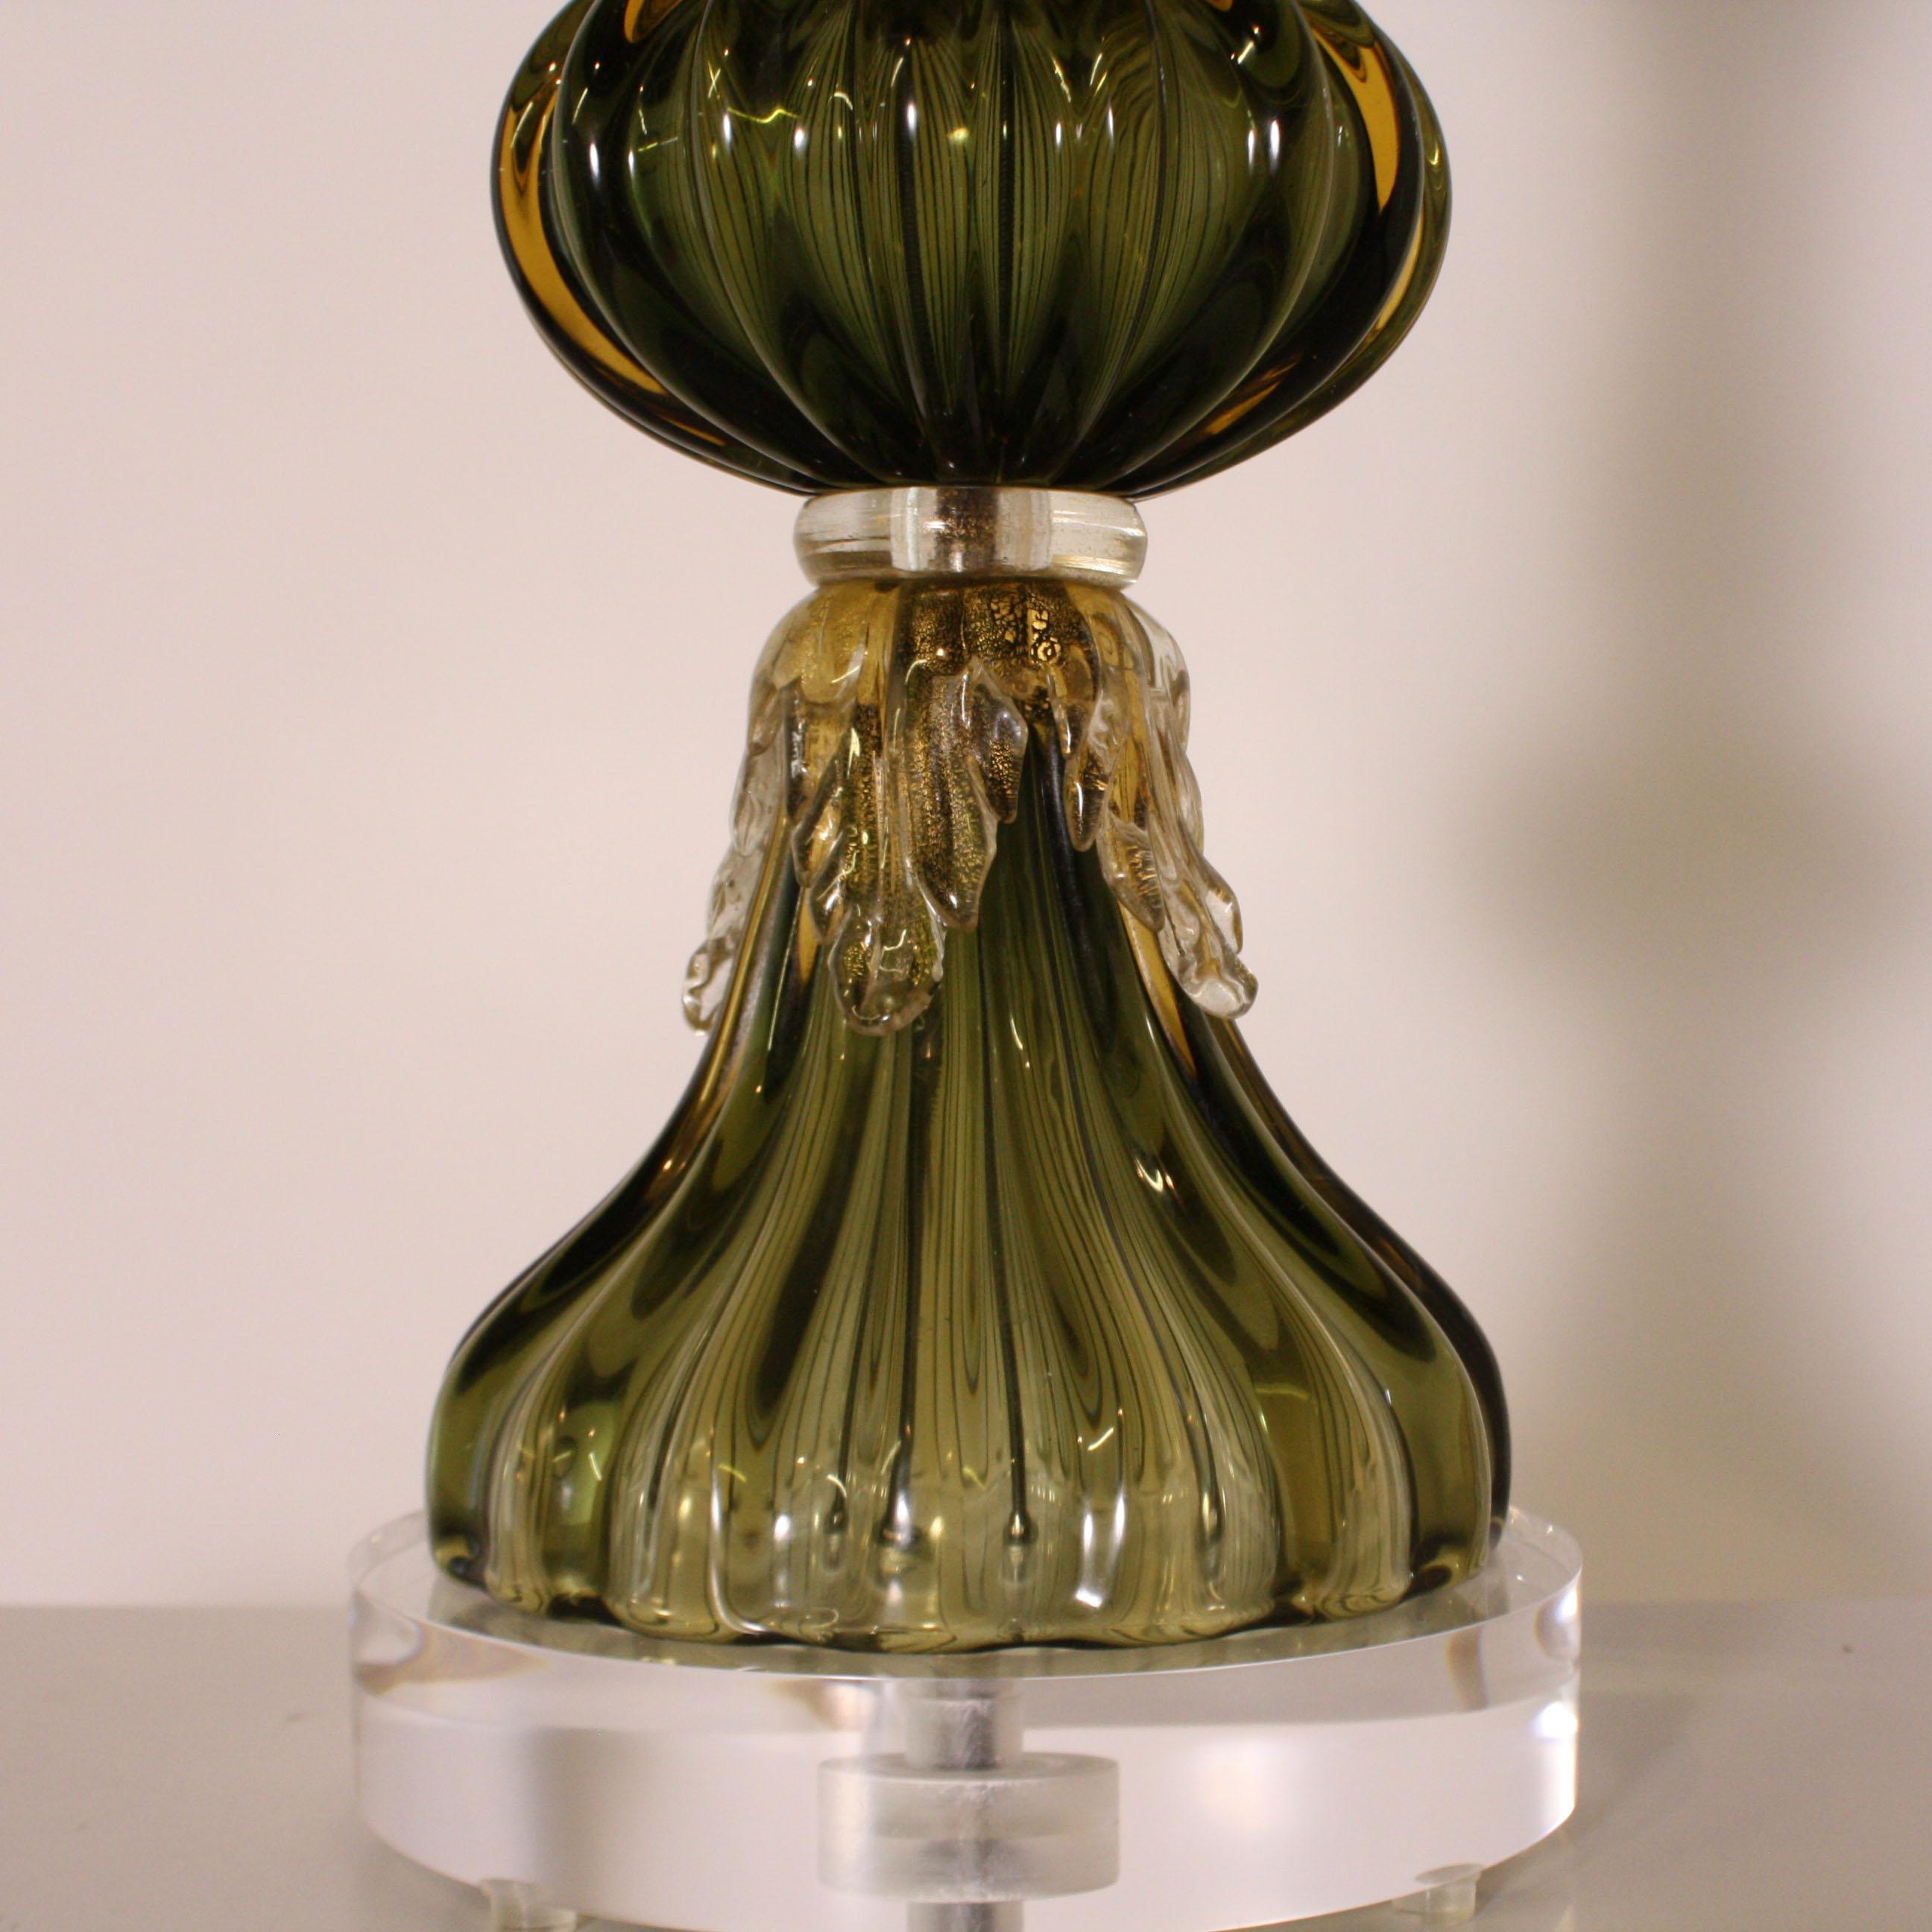 Green Seguso for Marbro lamp with gold leaves, circa 1960.